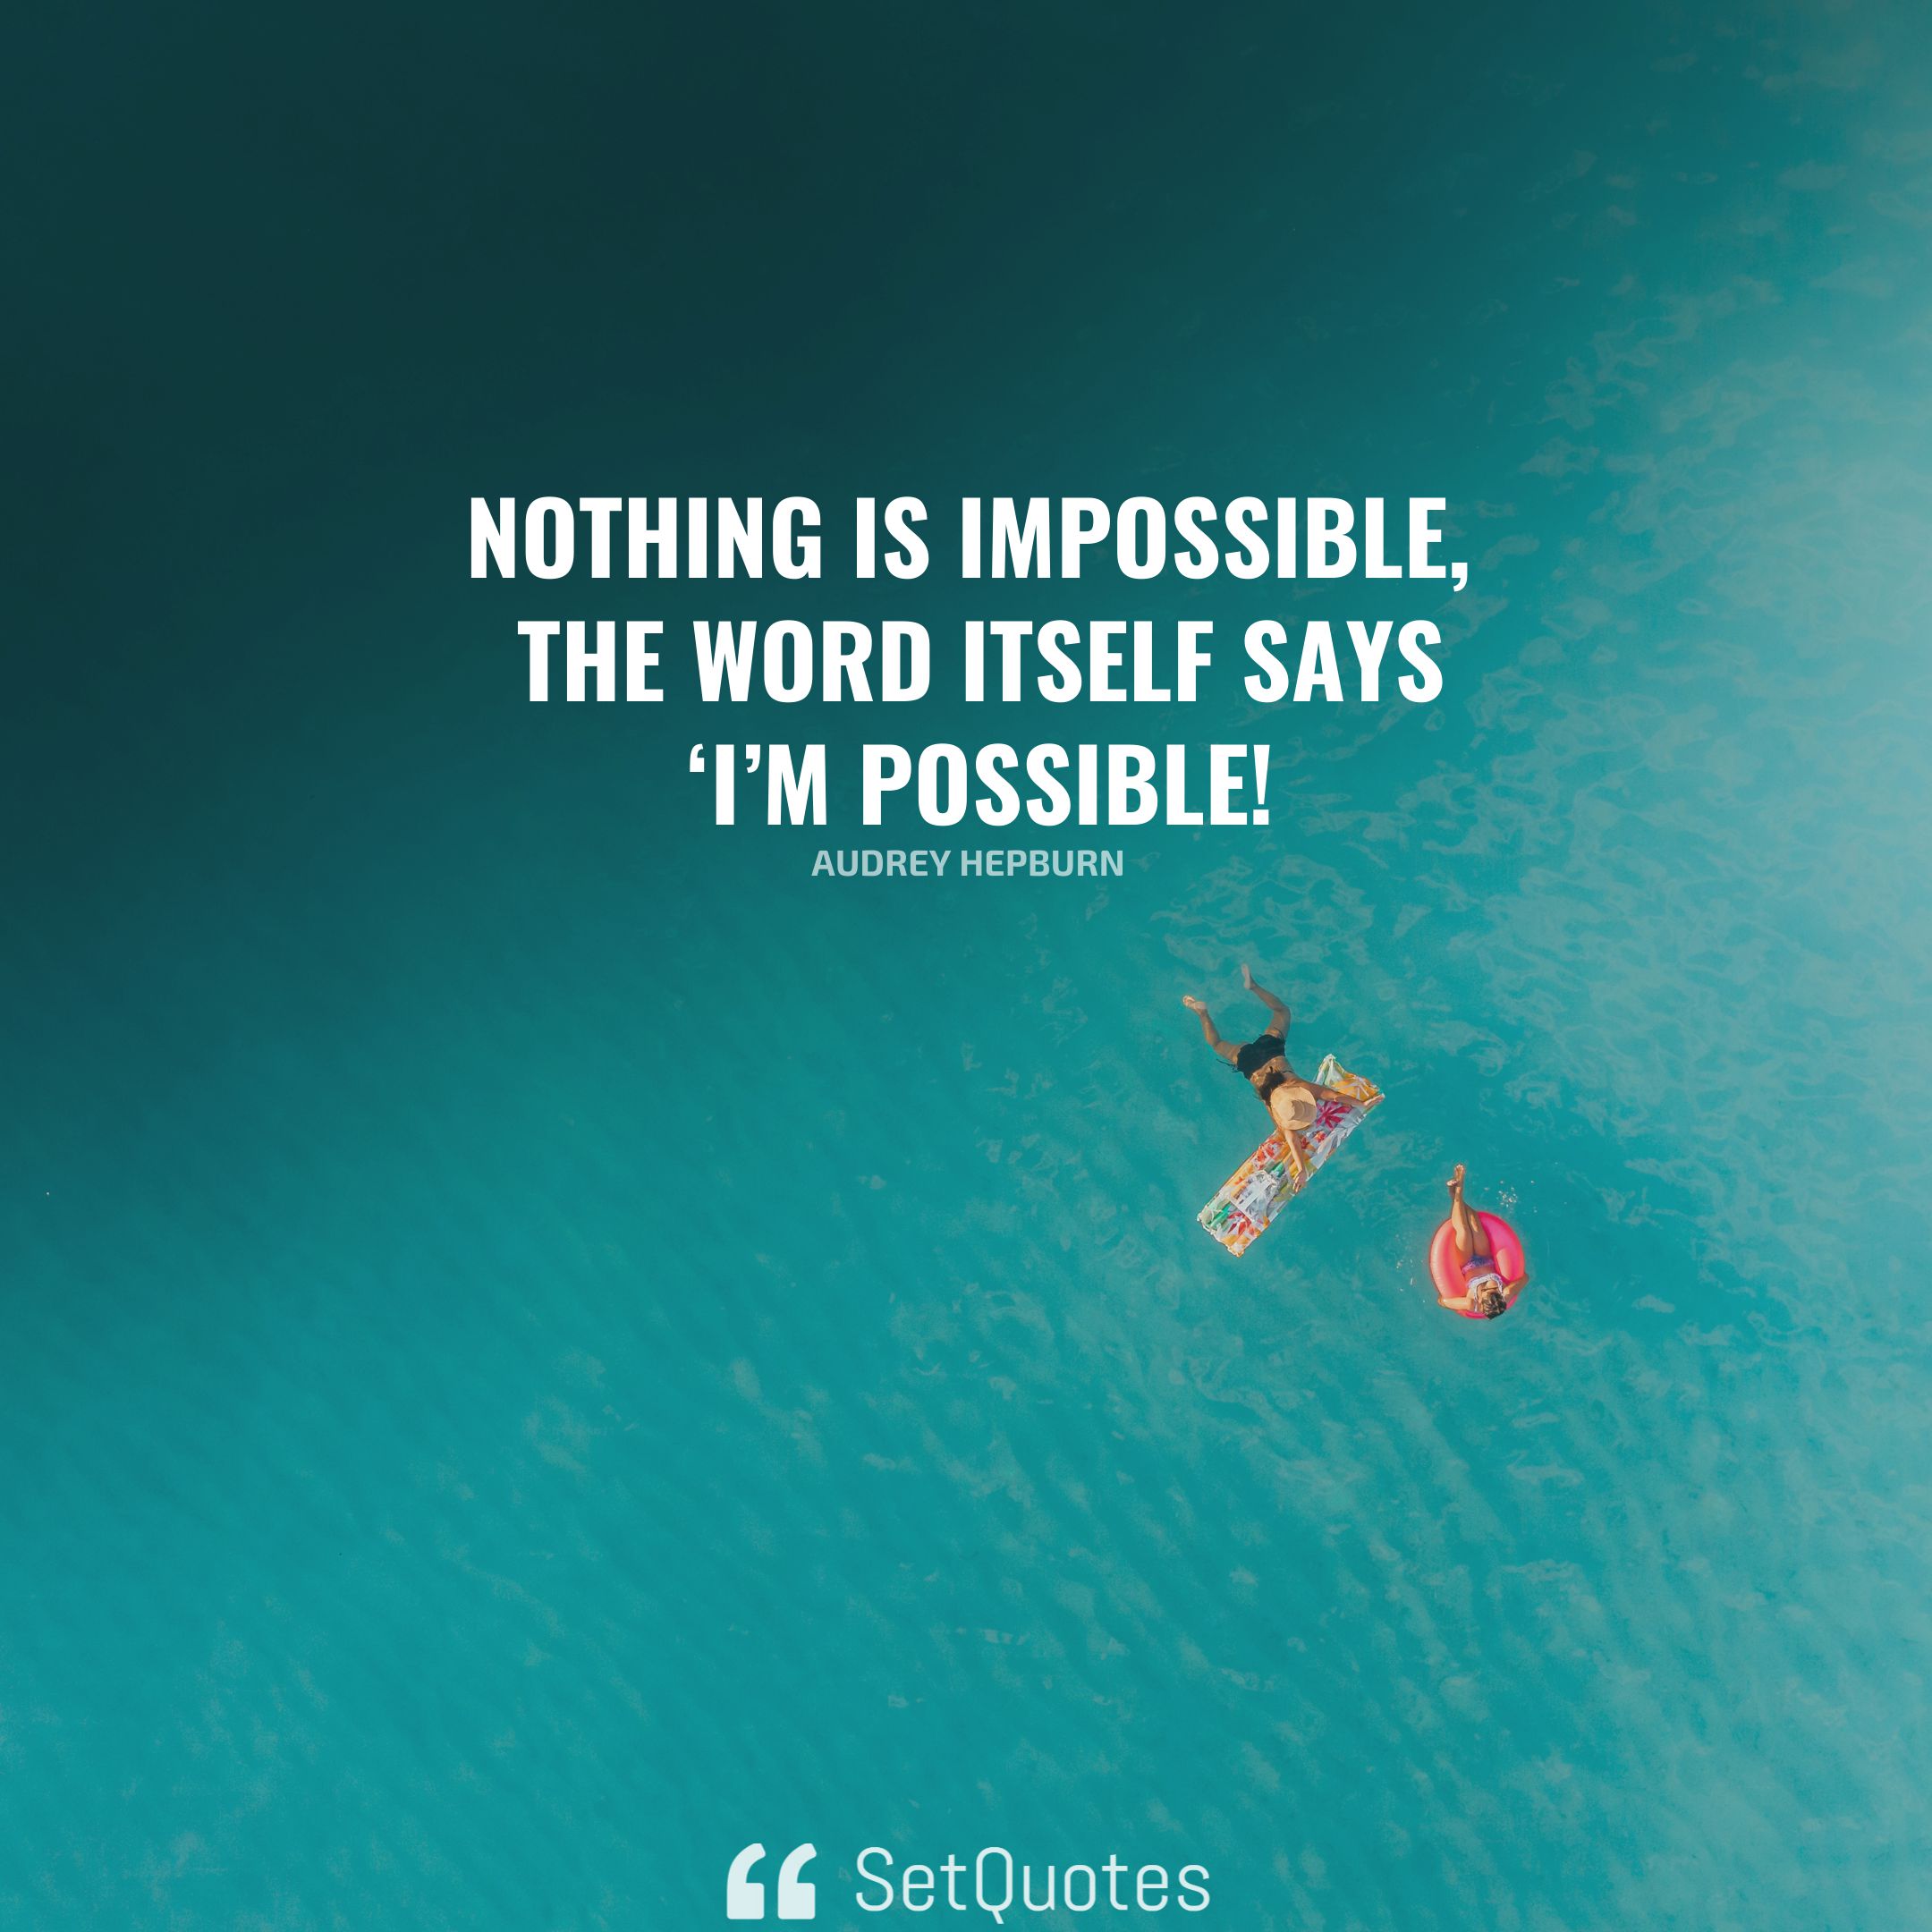 Nothing is impossible, the word itself says ‘I’m possible! – Audrey Hepburn